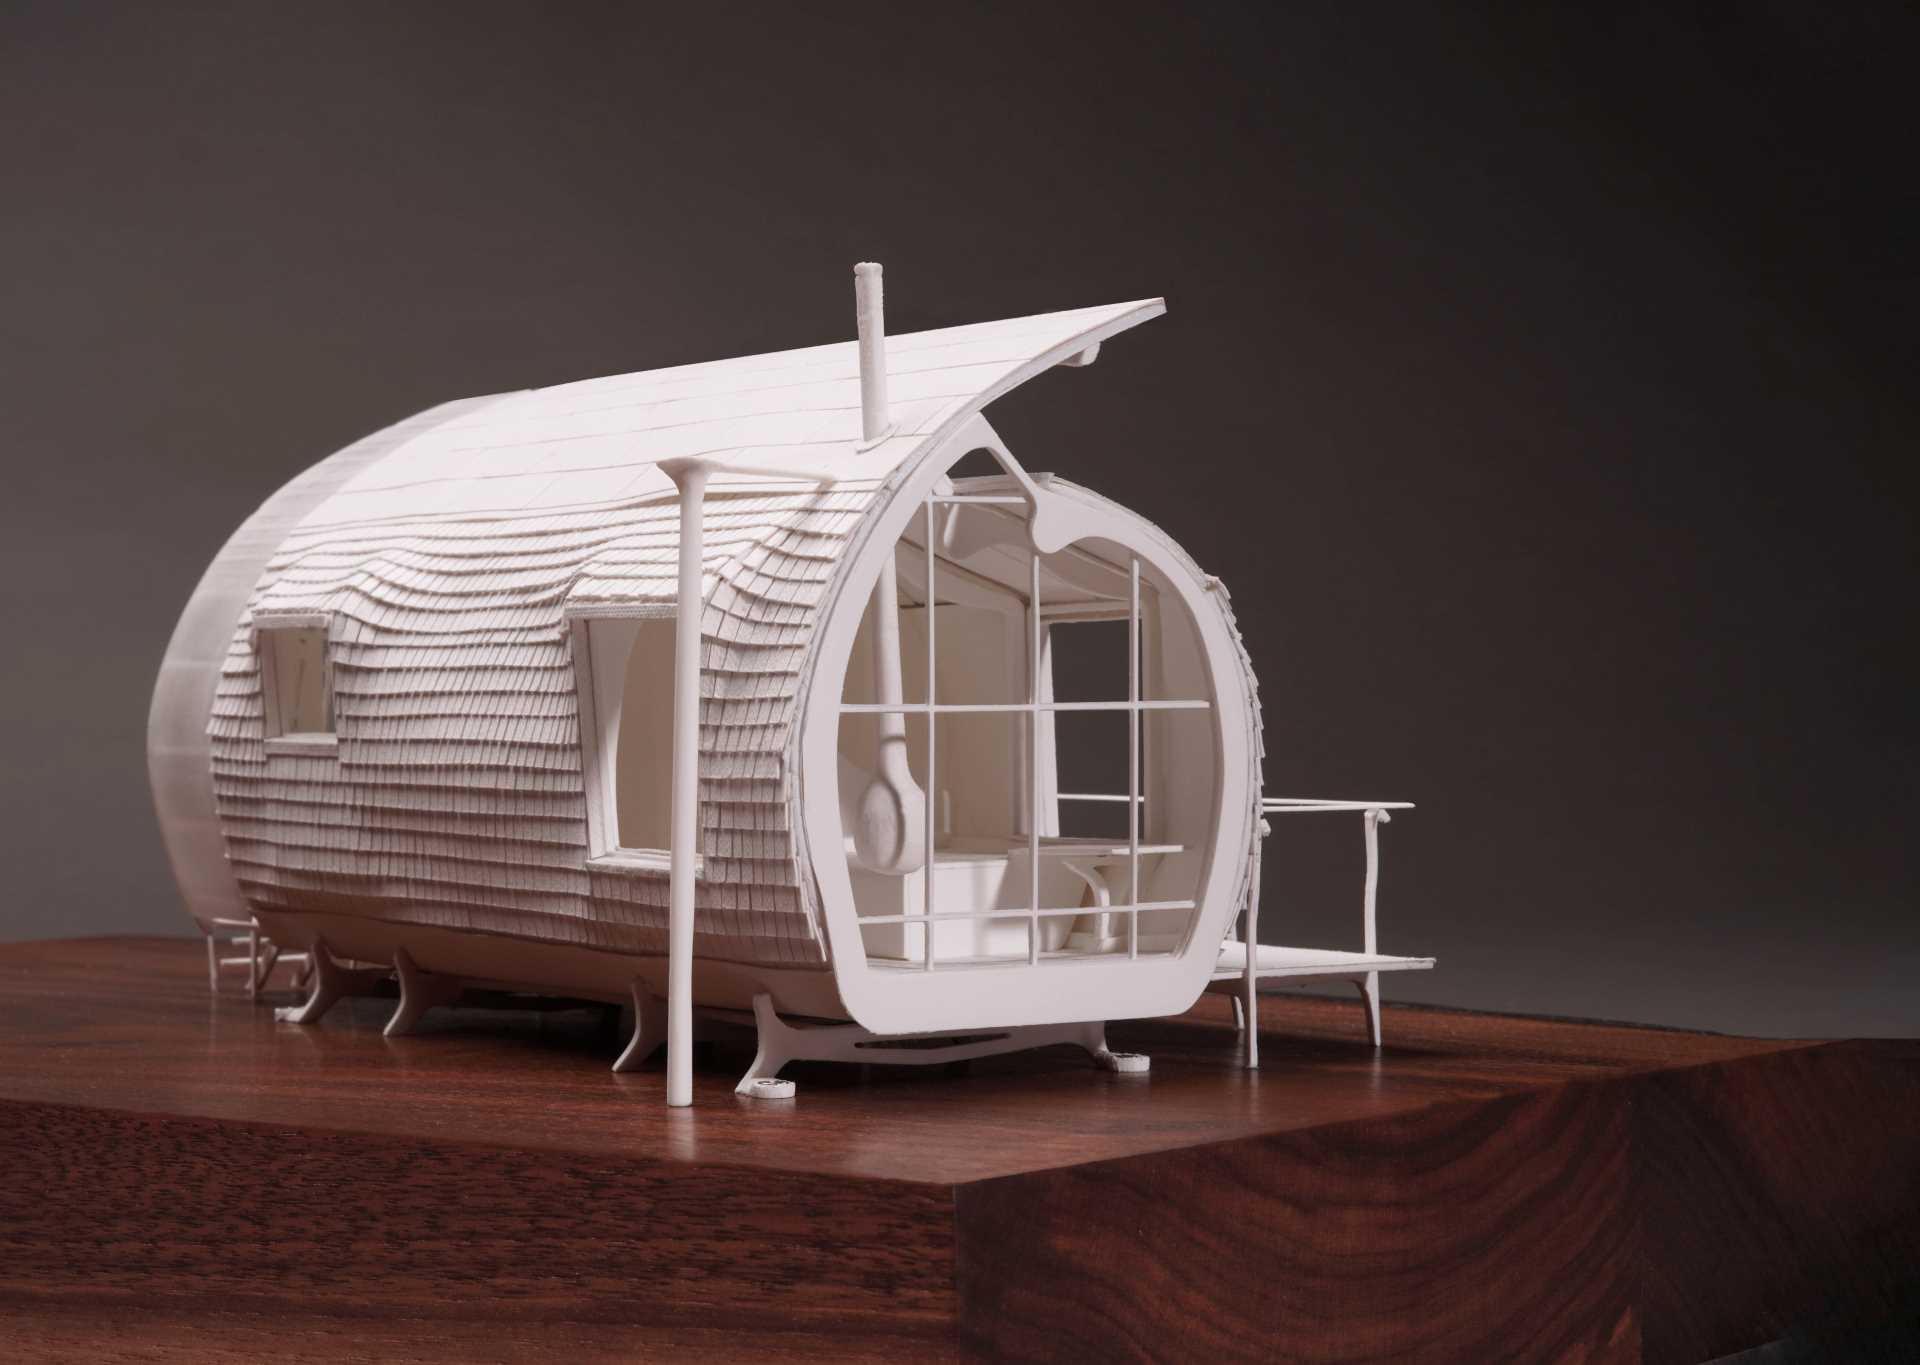 A small ،ically shaped cabin clad in wood ،ngles.